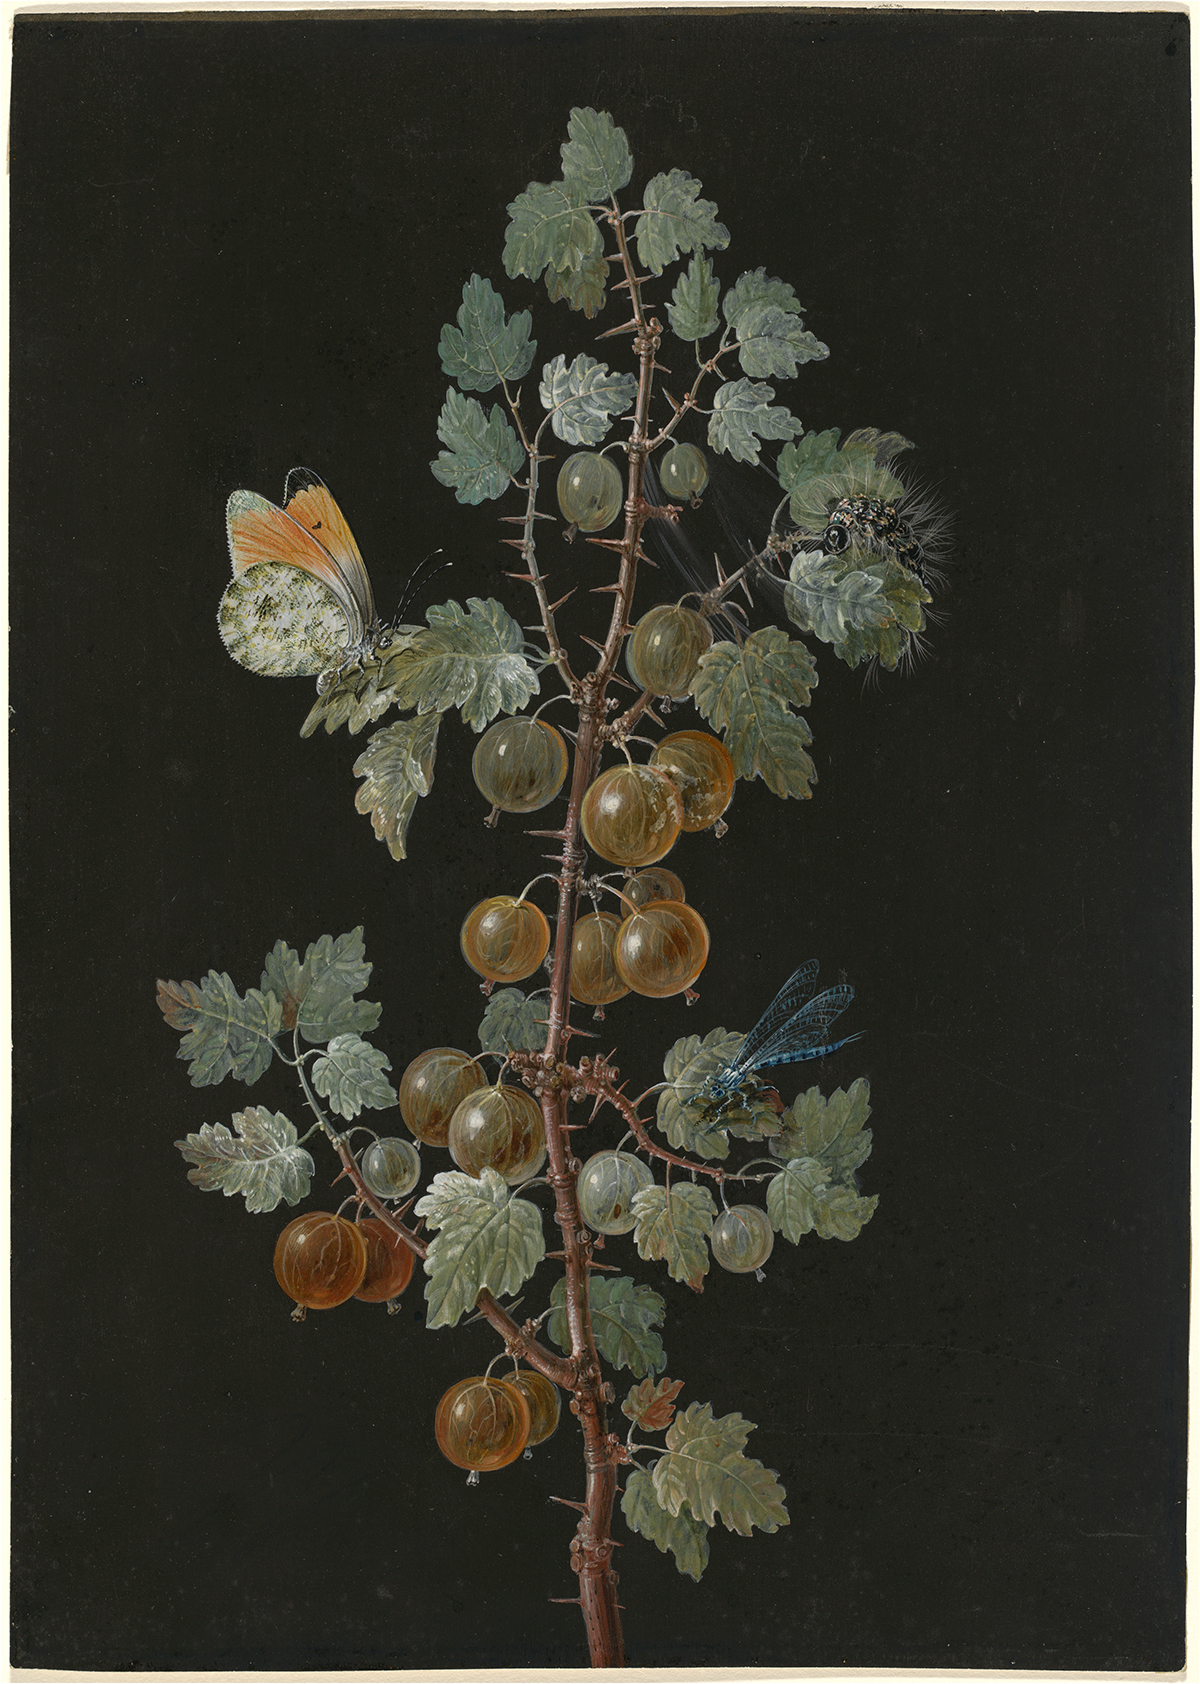 A Branch of Gooseberries with a Dragonfly, an Orange-Tip Butterfly, and a Caterpillar by Barbara Regina Dietzsch - 18th Century - 28.7 x 20.4 cm National Gallery of Art